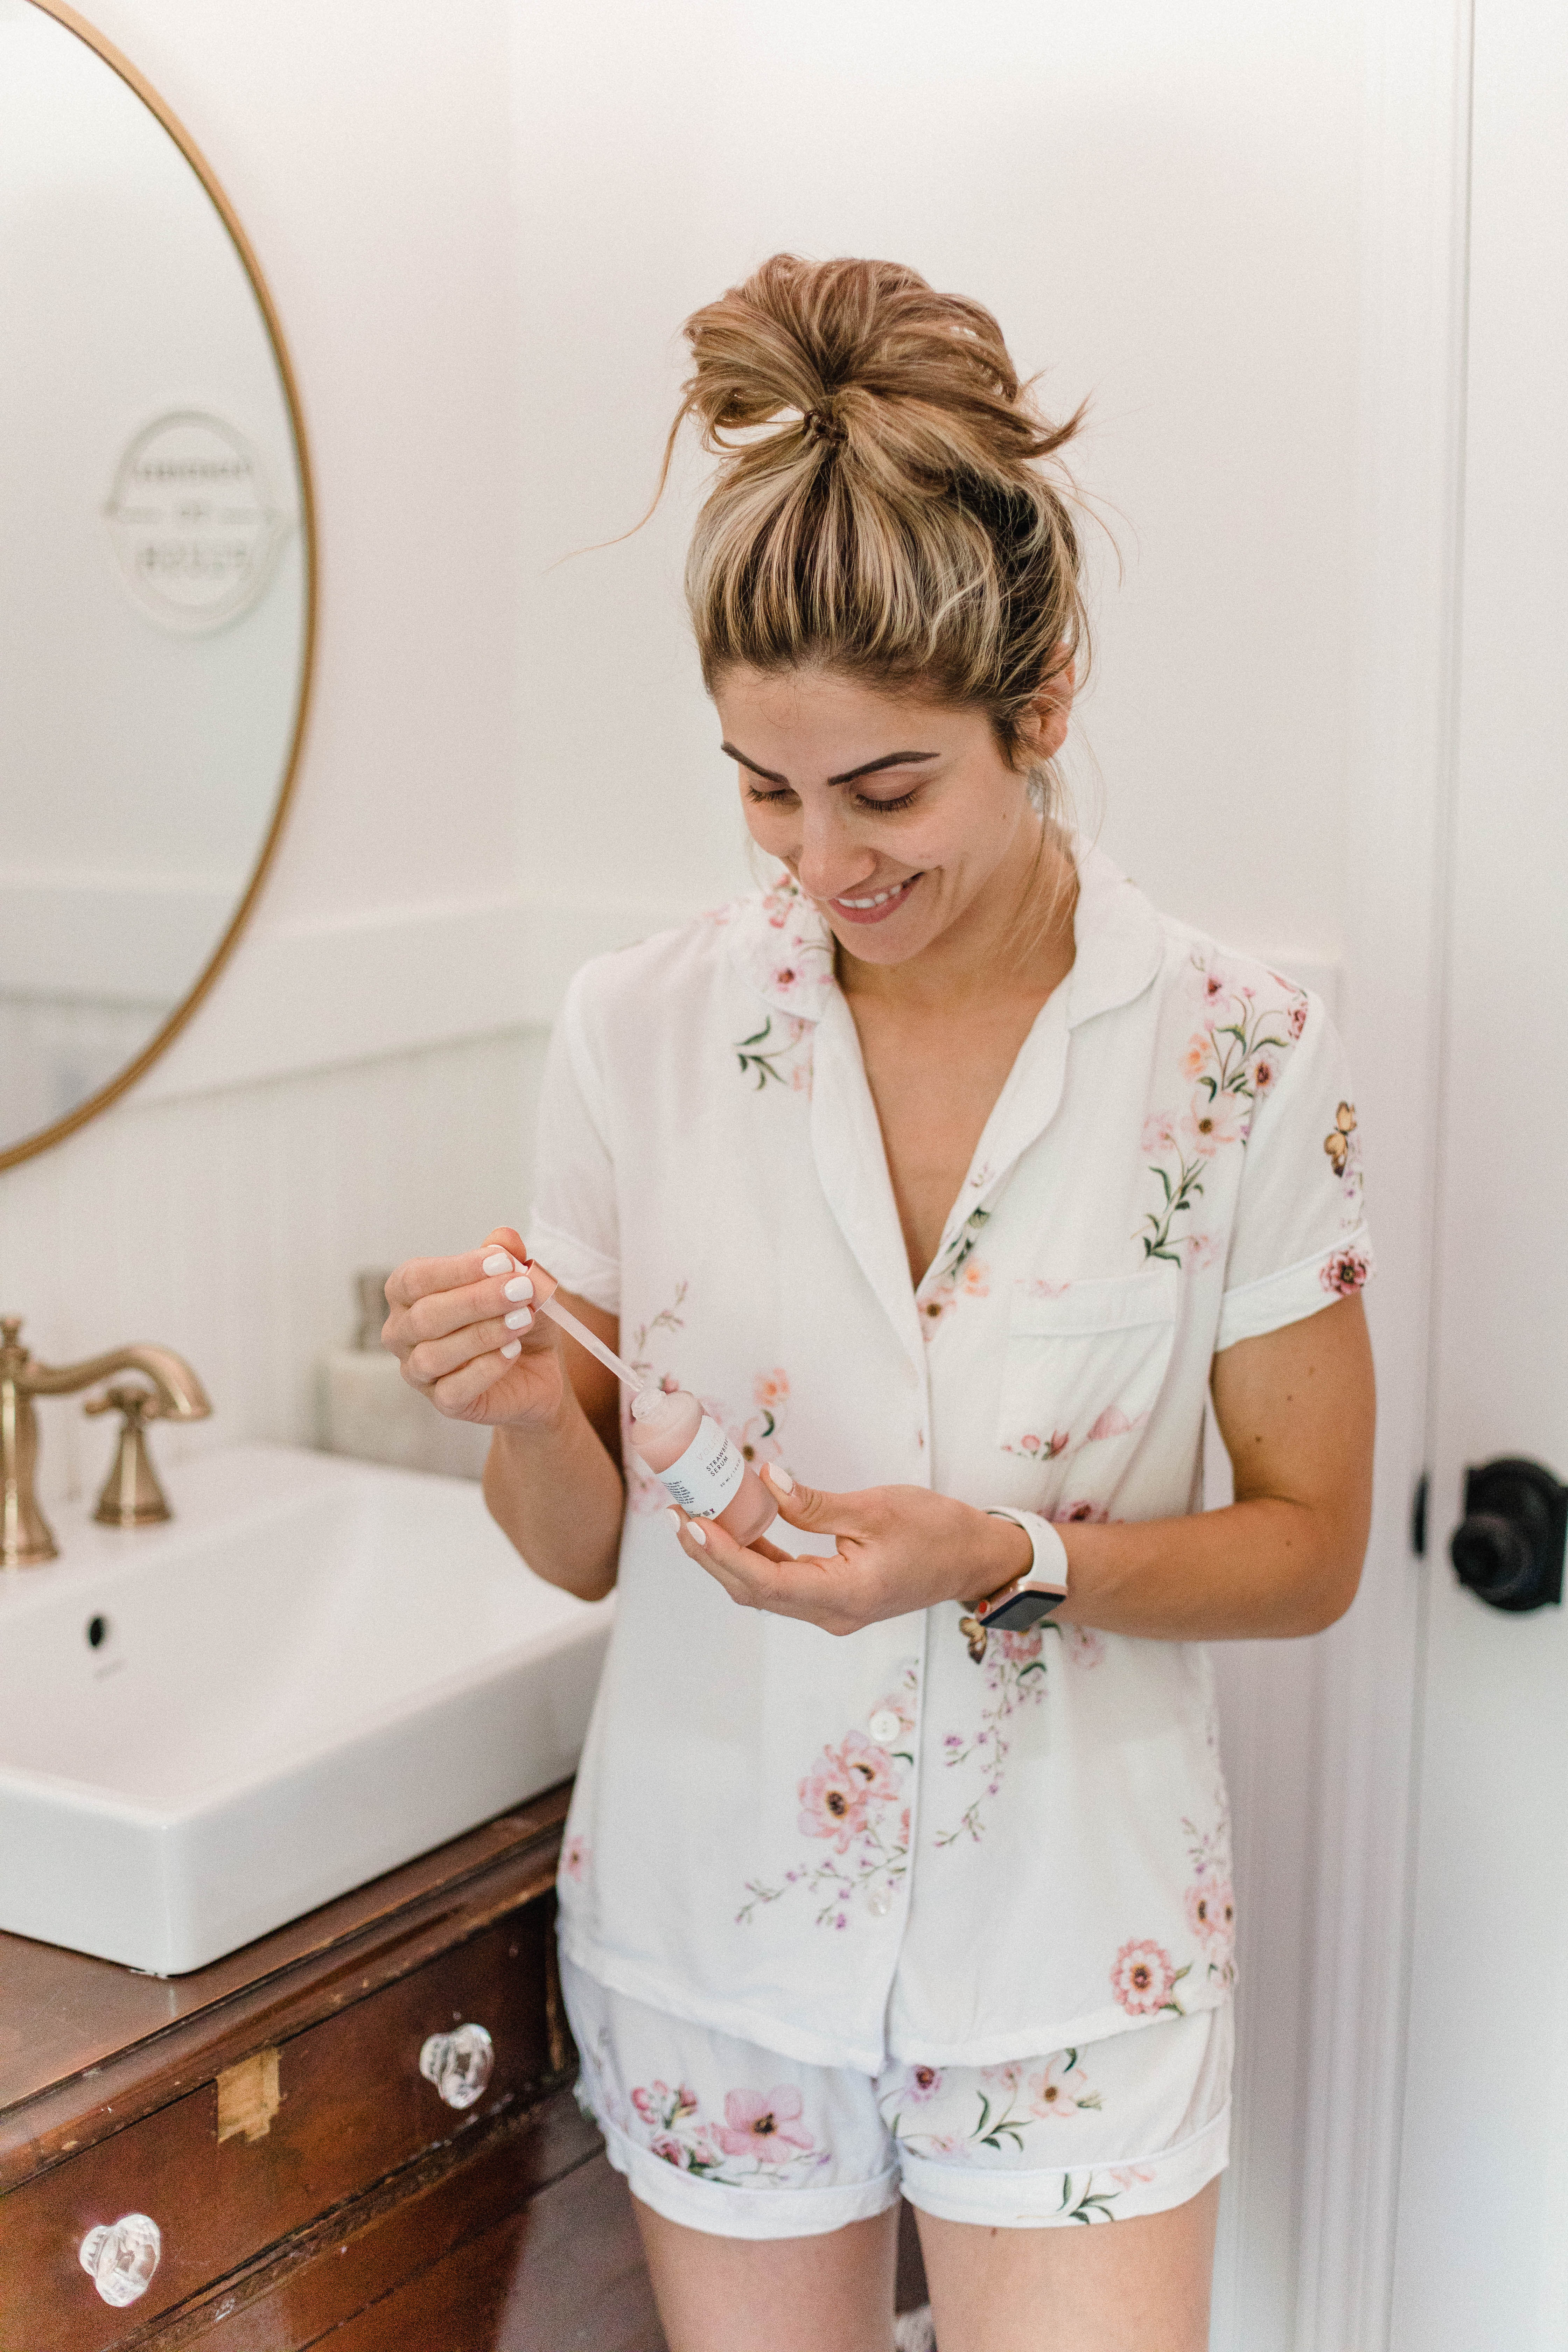 Connecticut life and style blogger Lauren McBride shares about Volition Beauty, a clean beauty brand, and her experience with their best selling items.